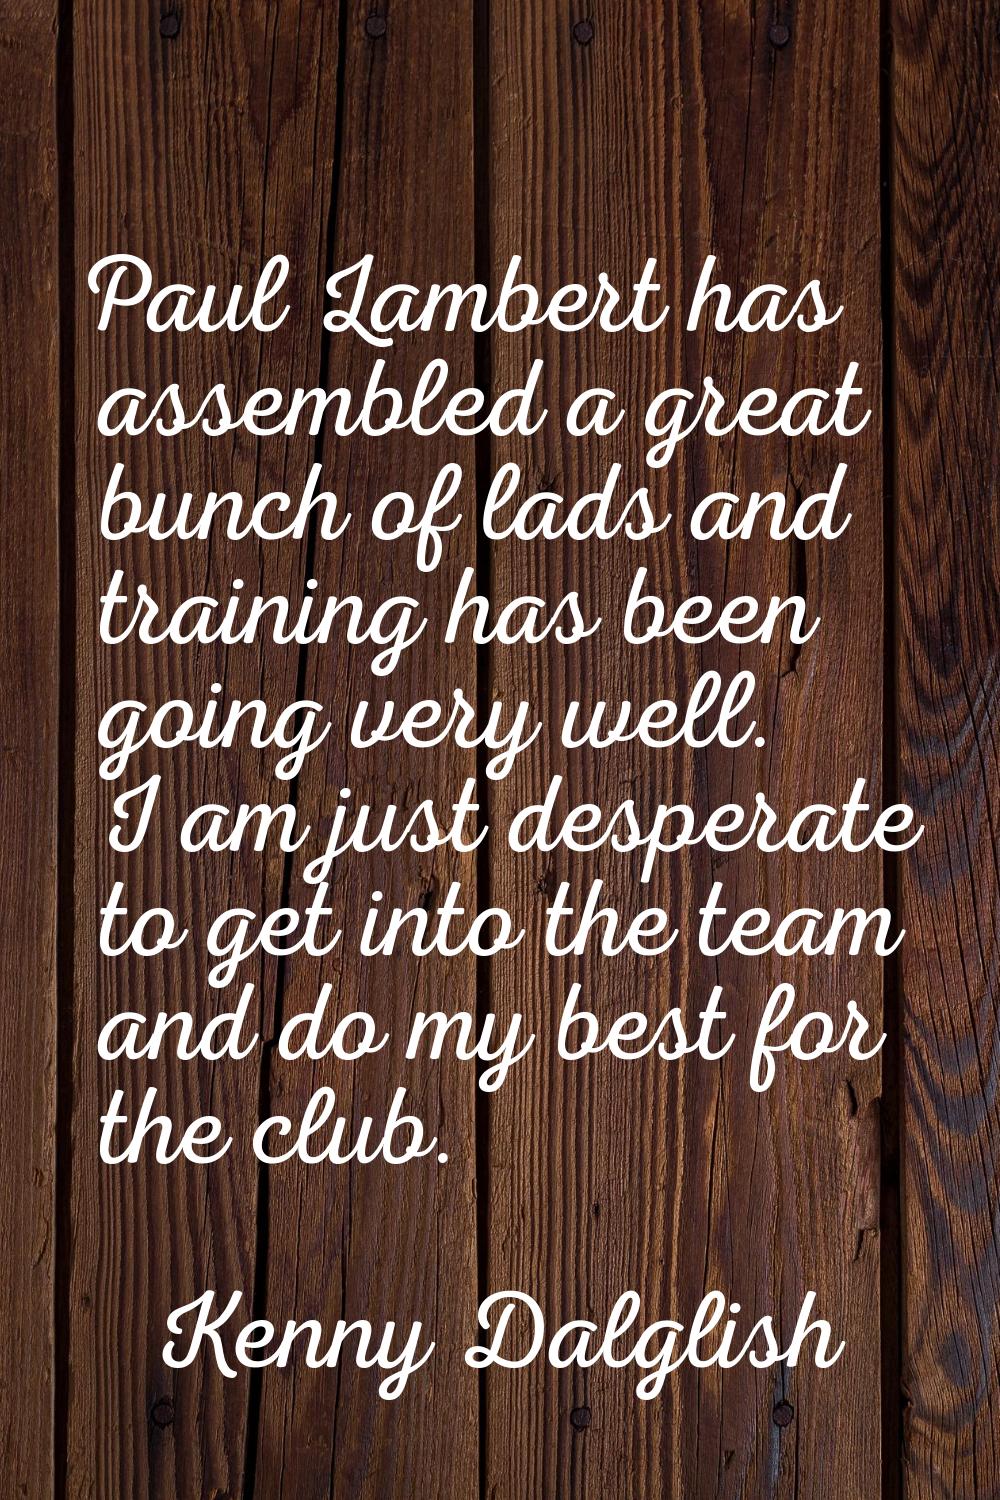 Paul Lambert has assembled a great bunch of lads and training has been going very well. I am just d